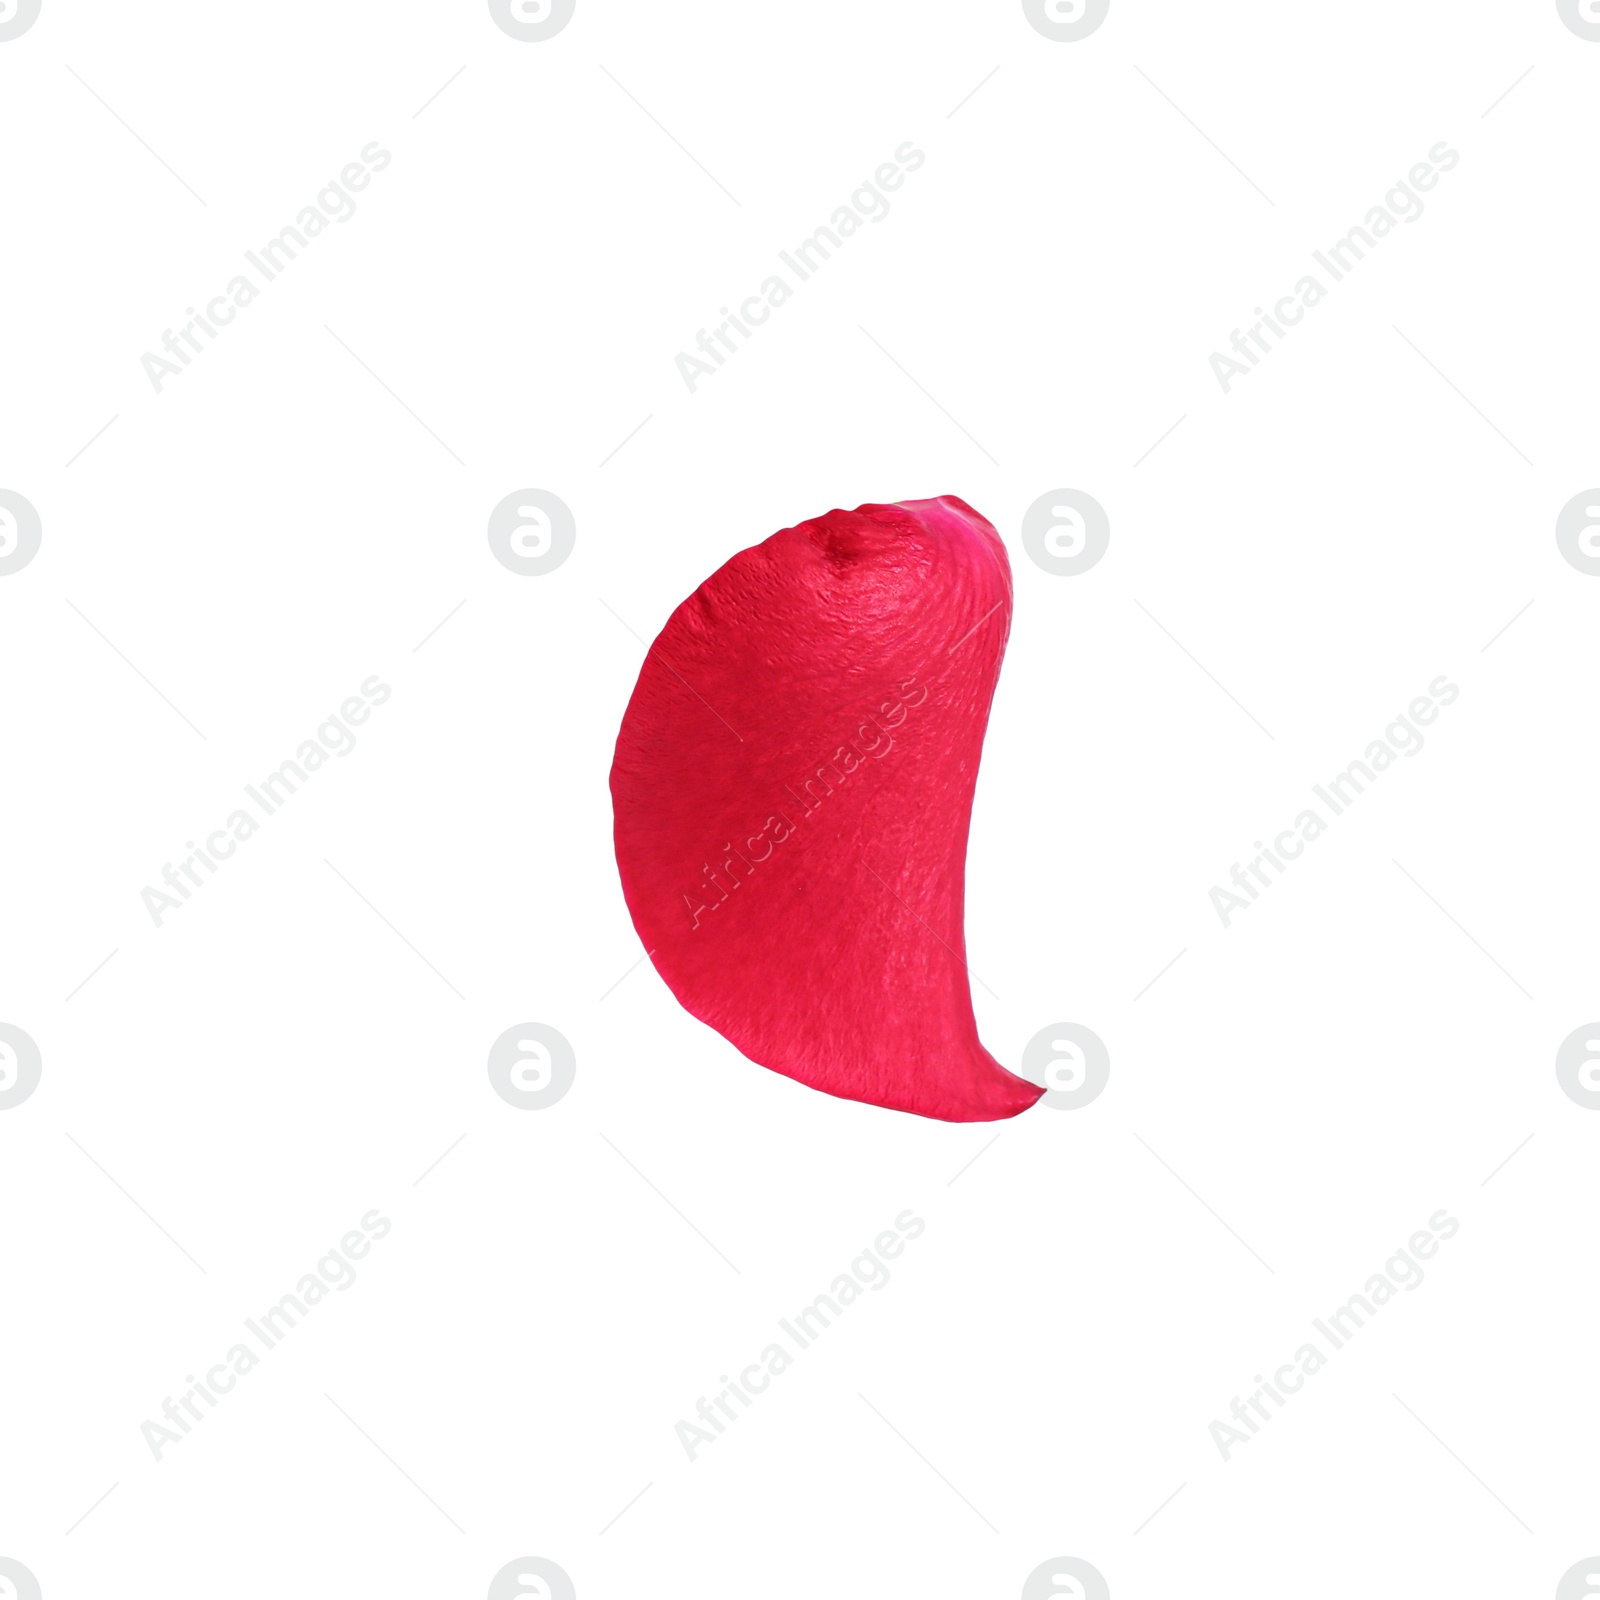 Photo of Bright red rose petal isolated on white